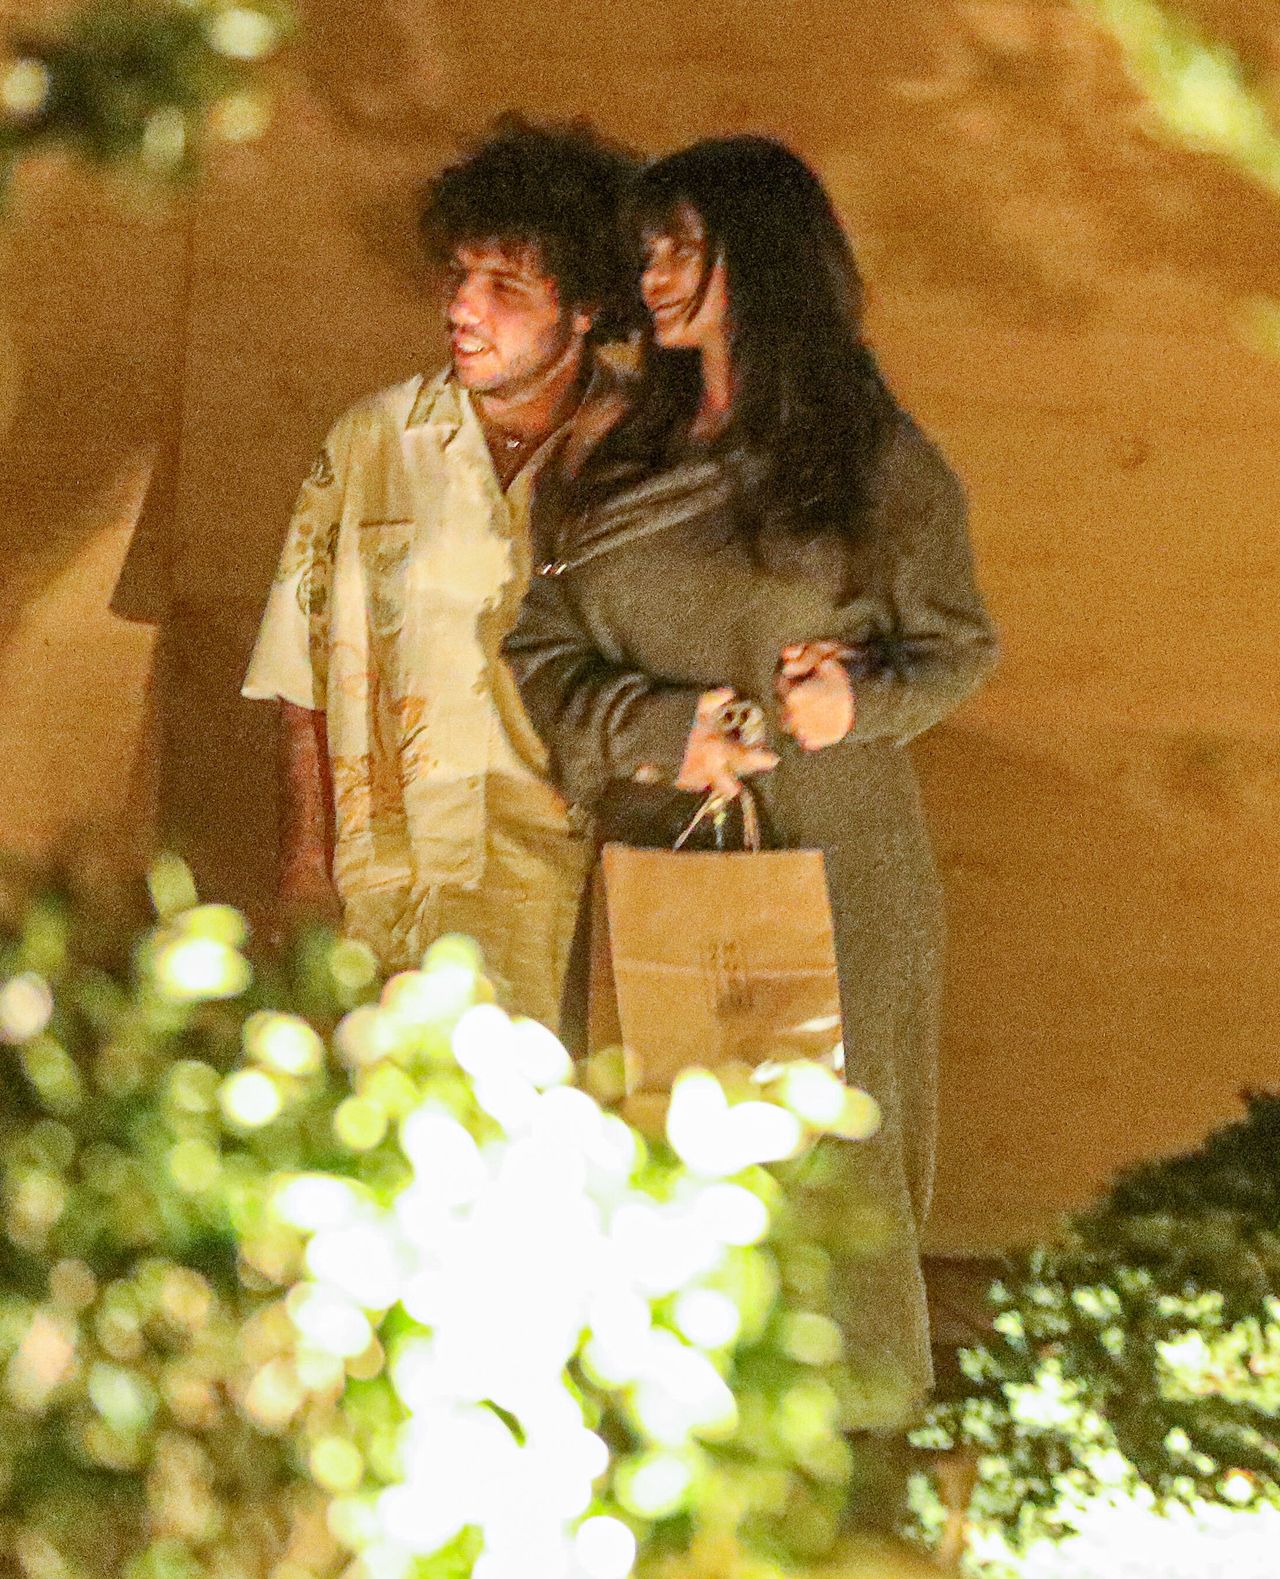 Selena Gomez and Benny Blanco "caught" on a date